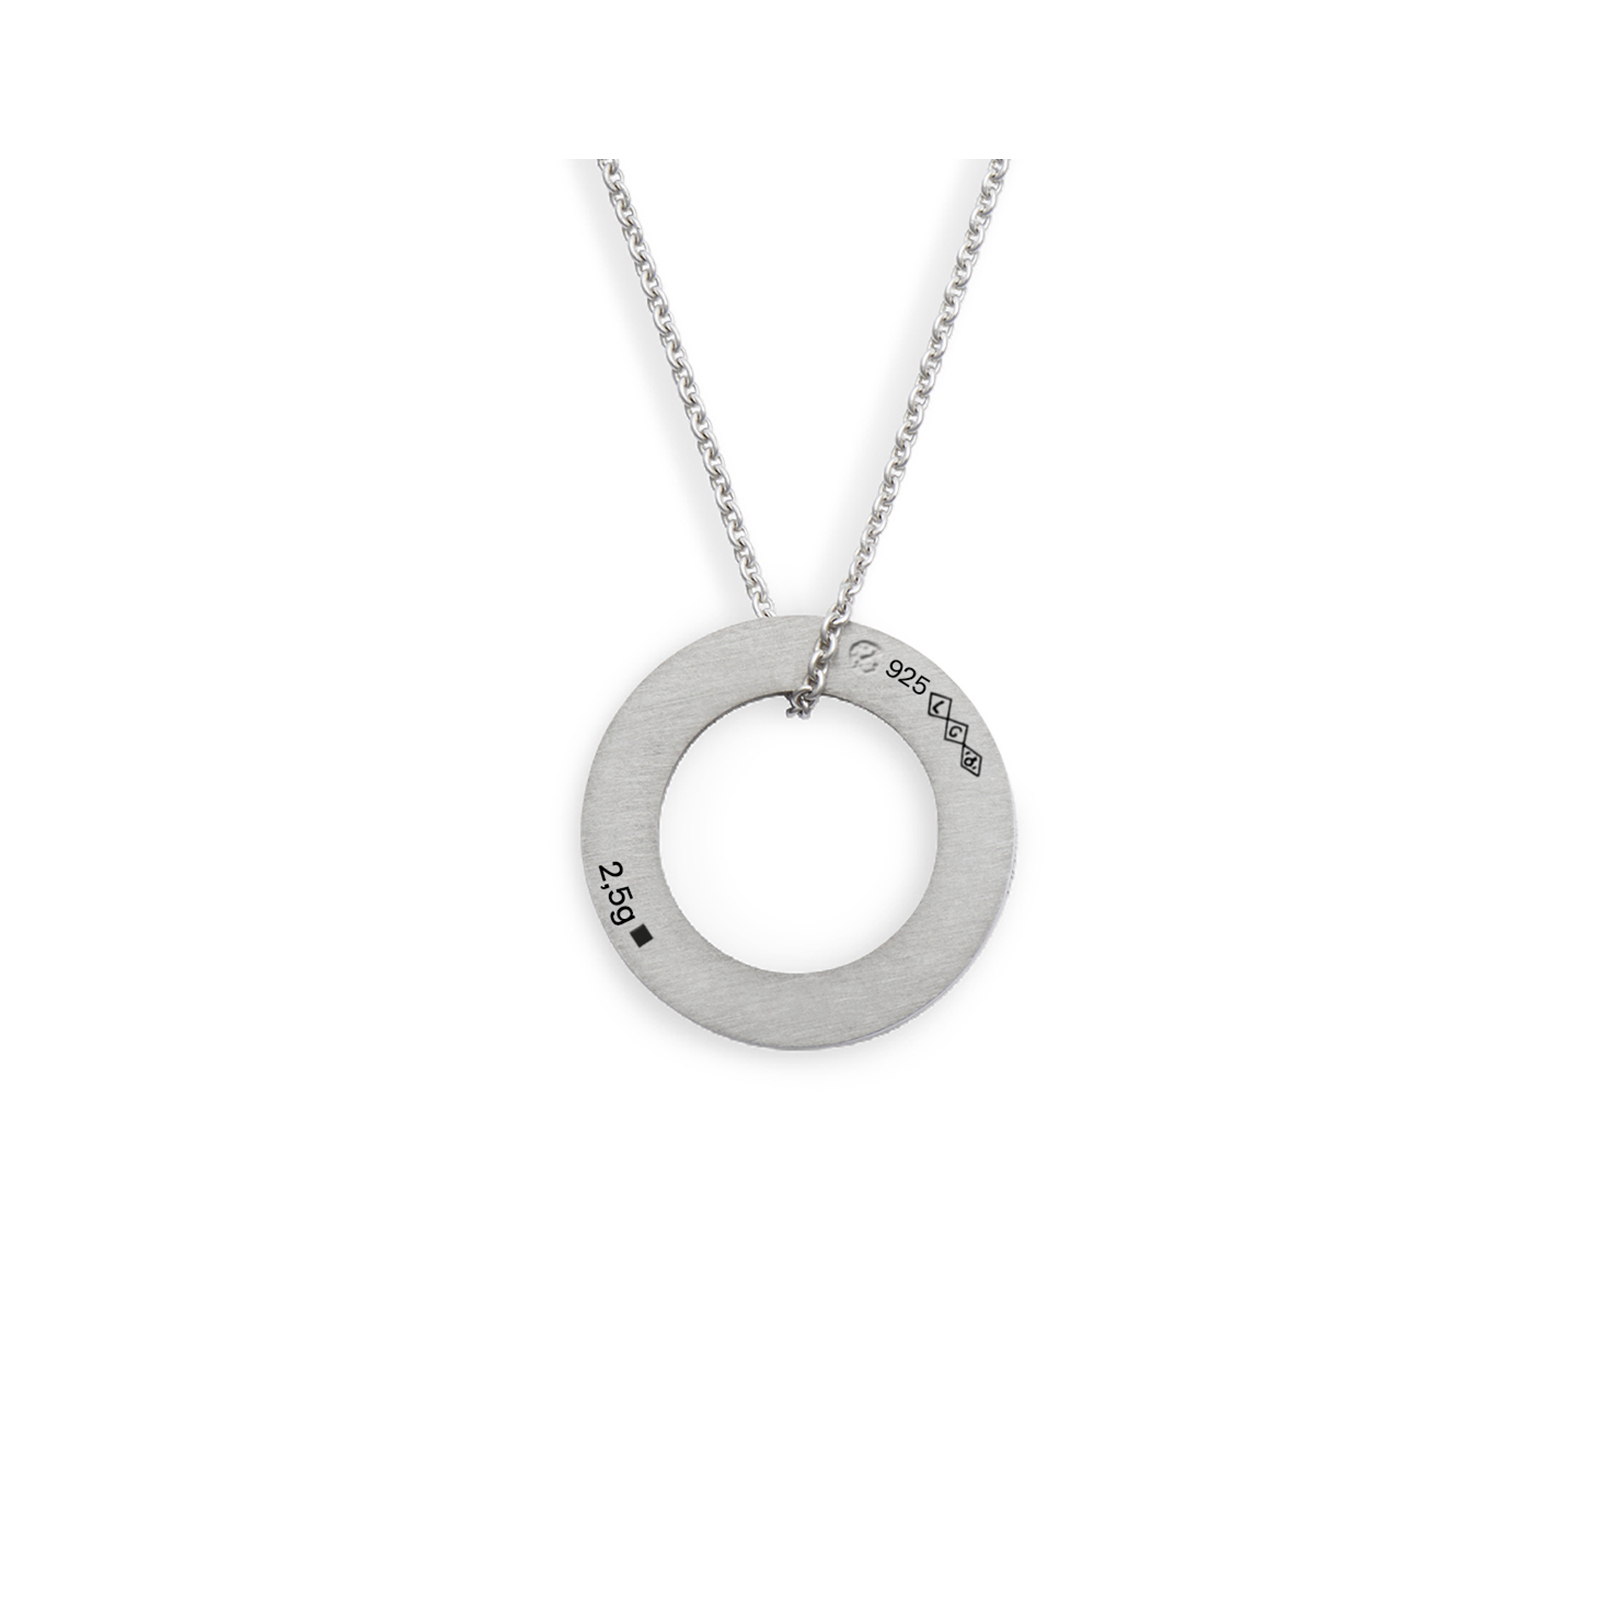 2,5g round pendant with a chain